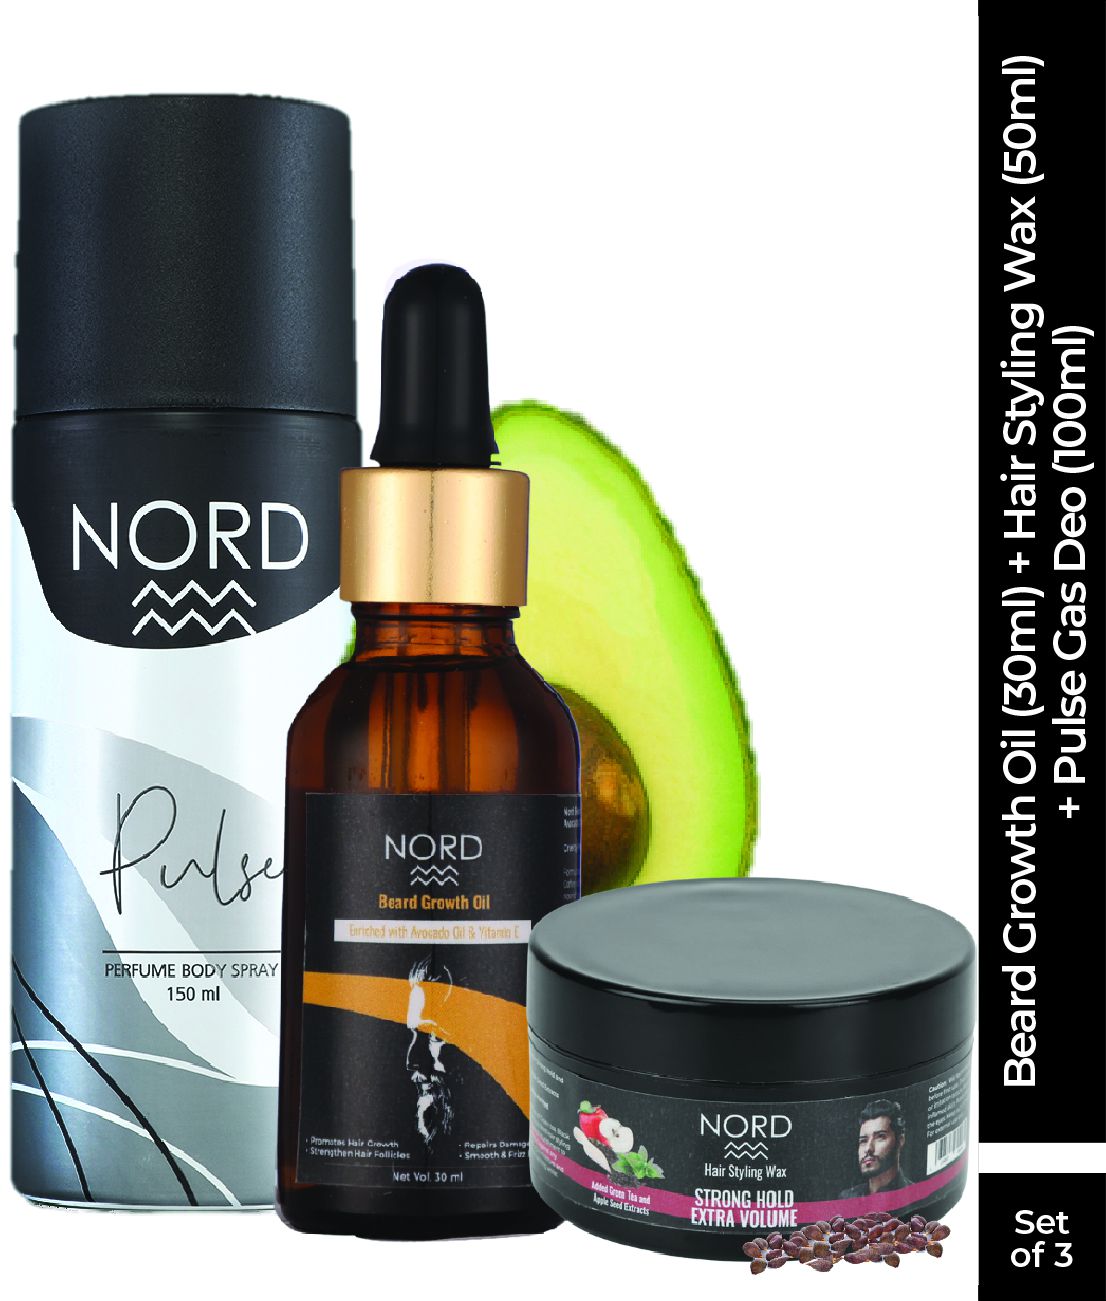 Nord Beard Growth Oil + Hair Styling Wax + Pulse Gas Deo | Pack of 3: Buy  Nord Beard Growth Oil + Hair Styling Wax + Pulse Gas Deo | Pack of 3 at  Best Prices in India - Snapdeal